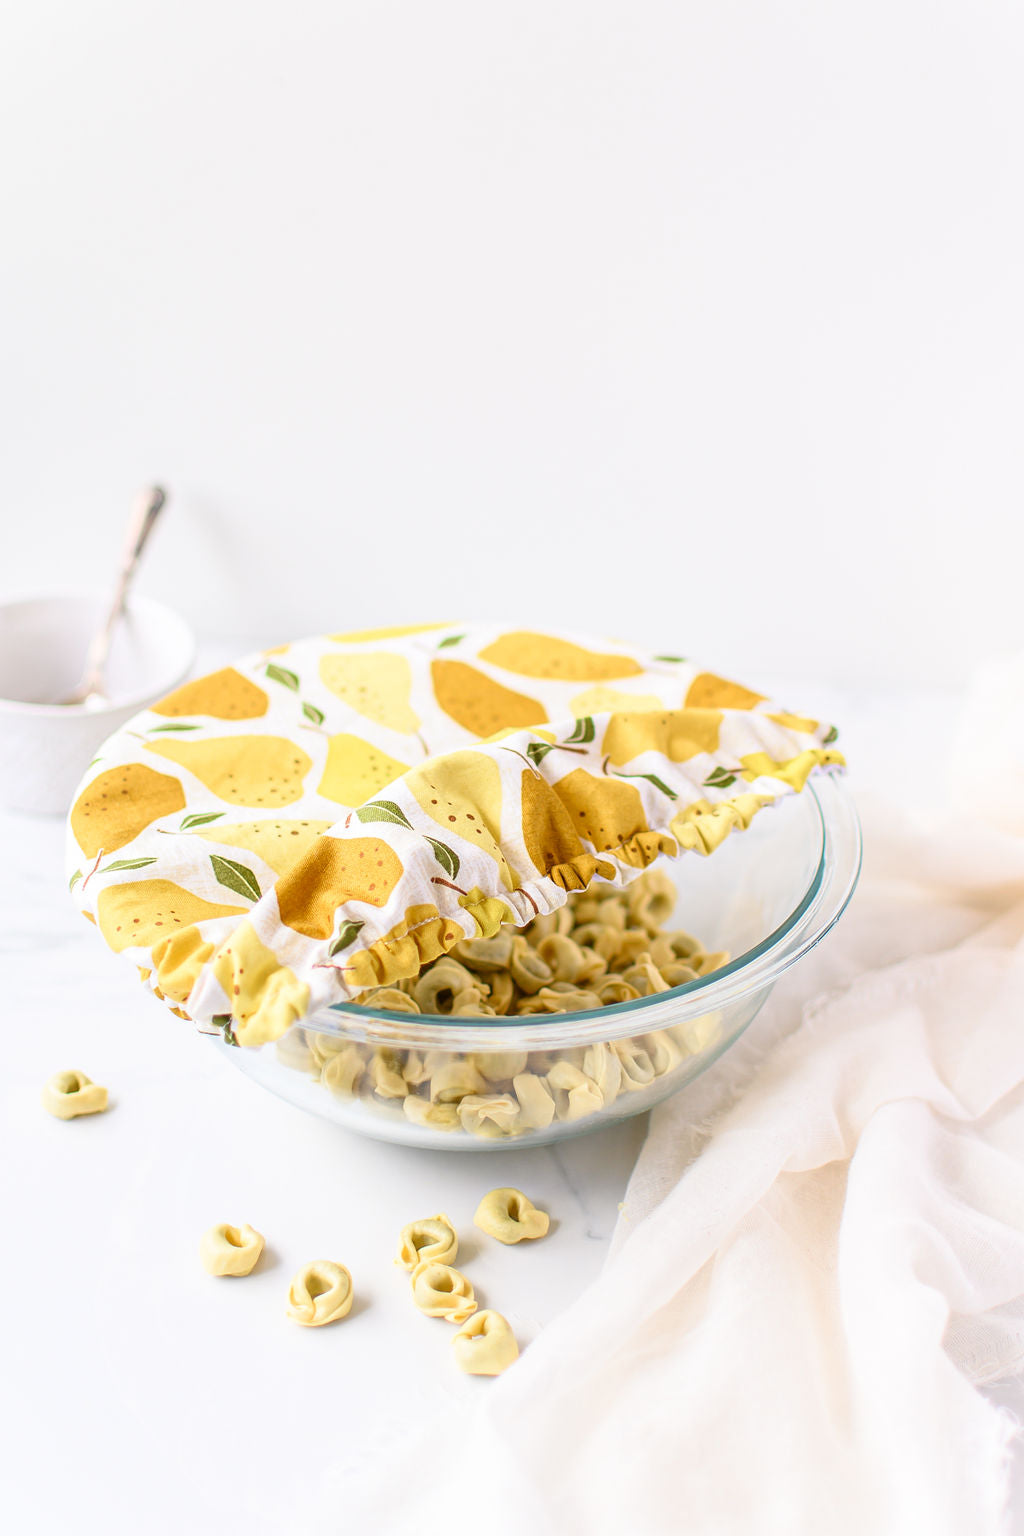 Reusable Dish Covers - Yellow Pear